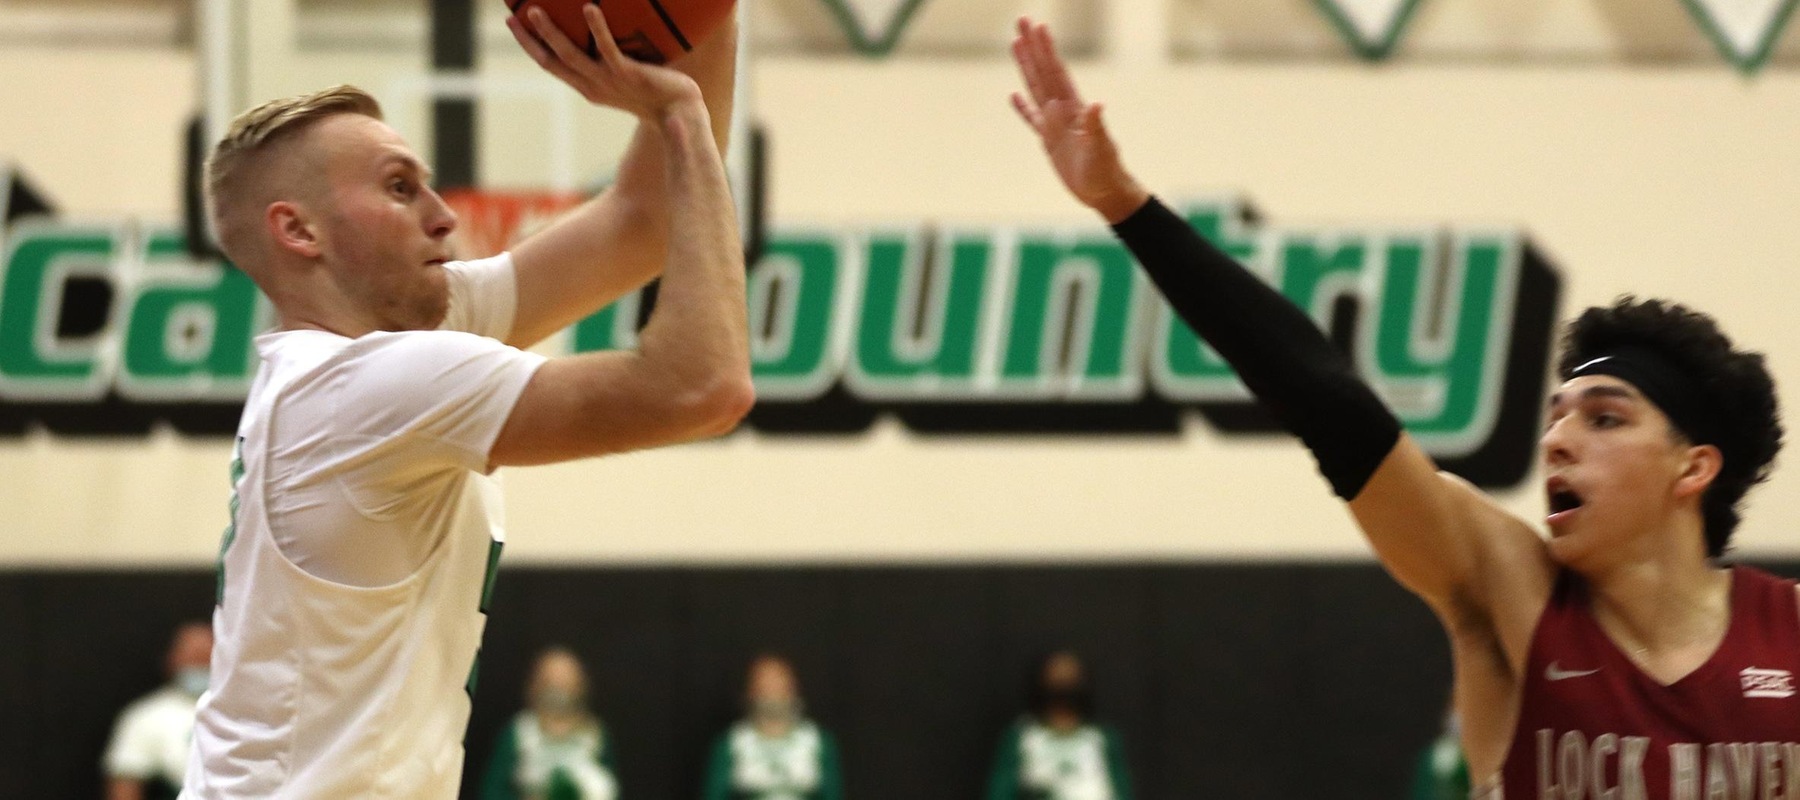 File photo of Caleb Matthews who sank seven three-pointers and ended with 26 points at Goldey-Beacom. Copyright 2021; Wilmington University. All rights reserved. Photo by Trudy Spence. December 11 vs. Lock Haven.